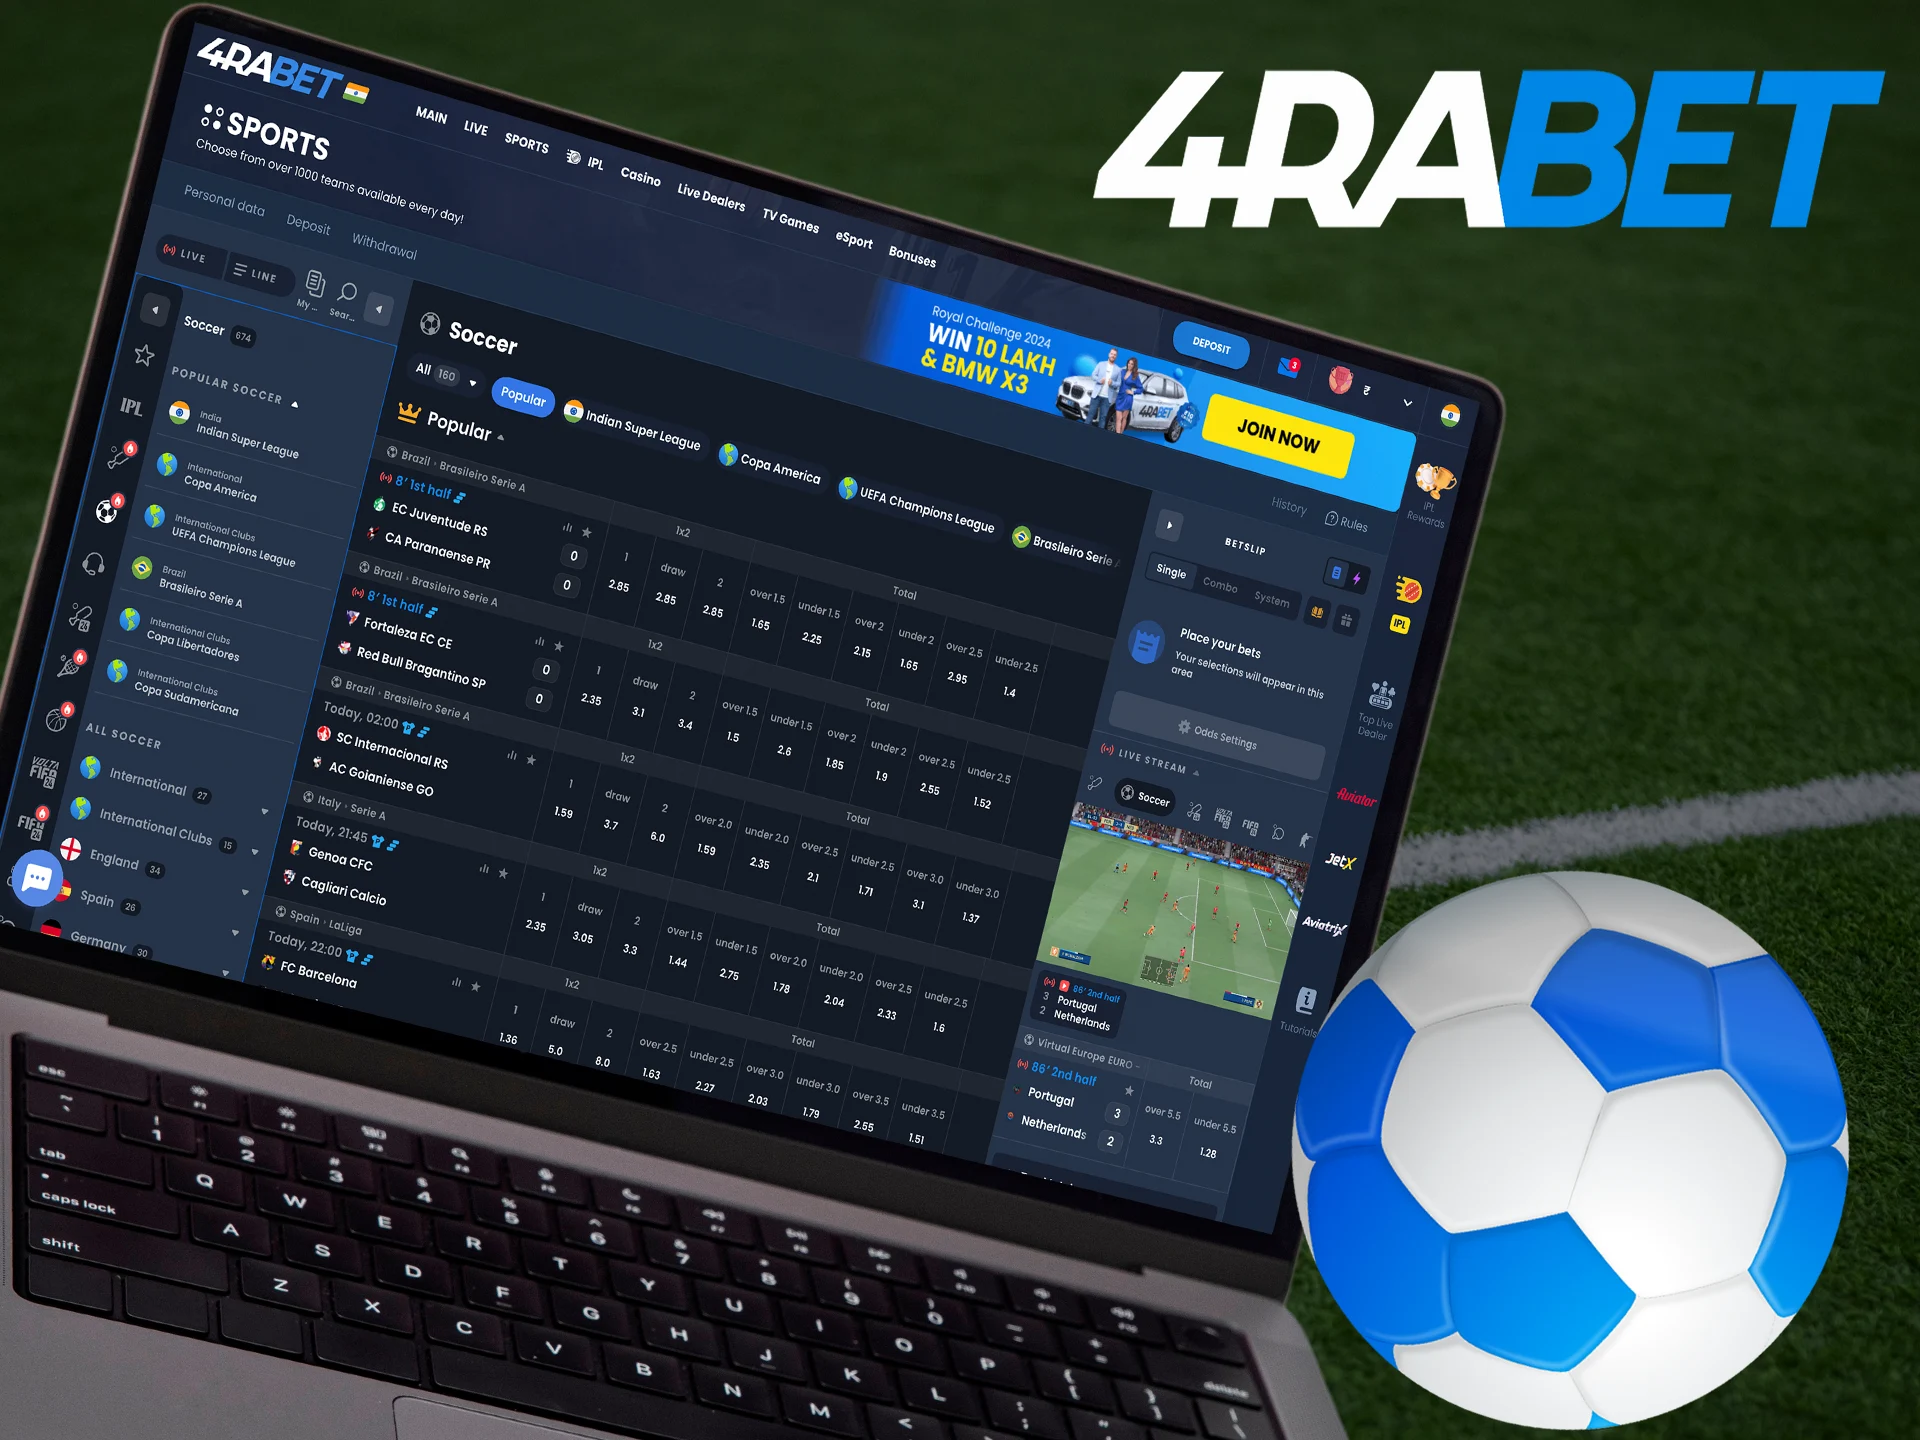 Check out the football betting section on the 4Rabet online platform, which offers a wide variety of matches.